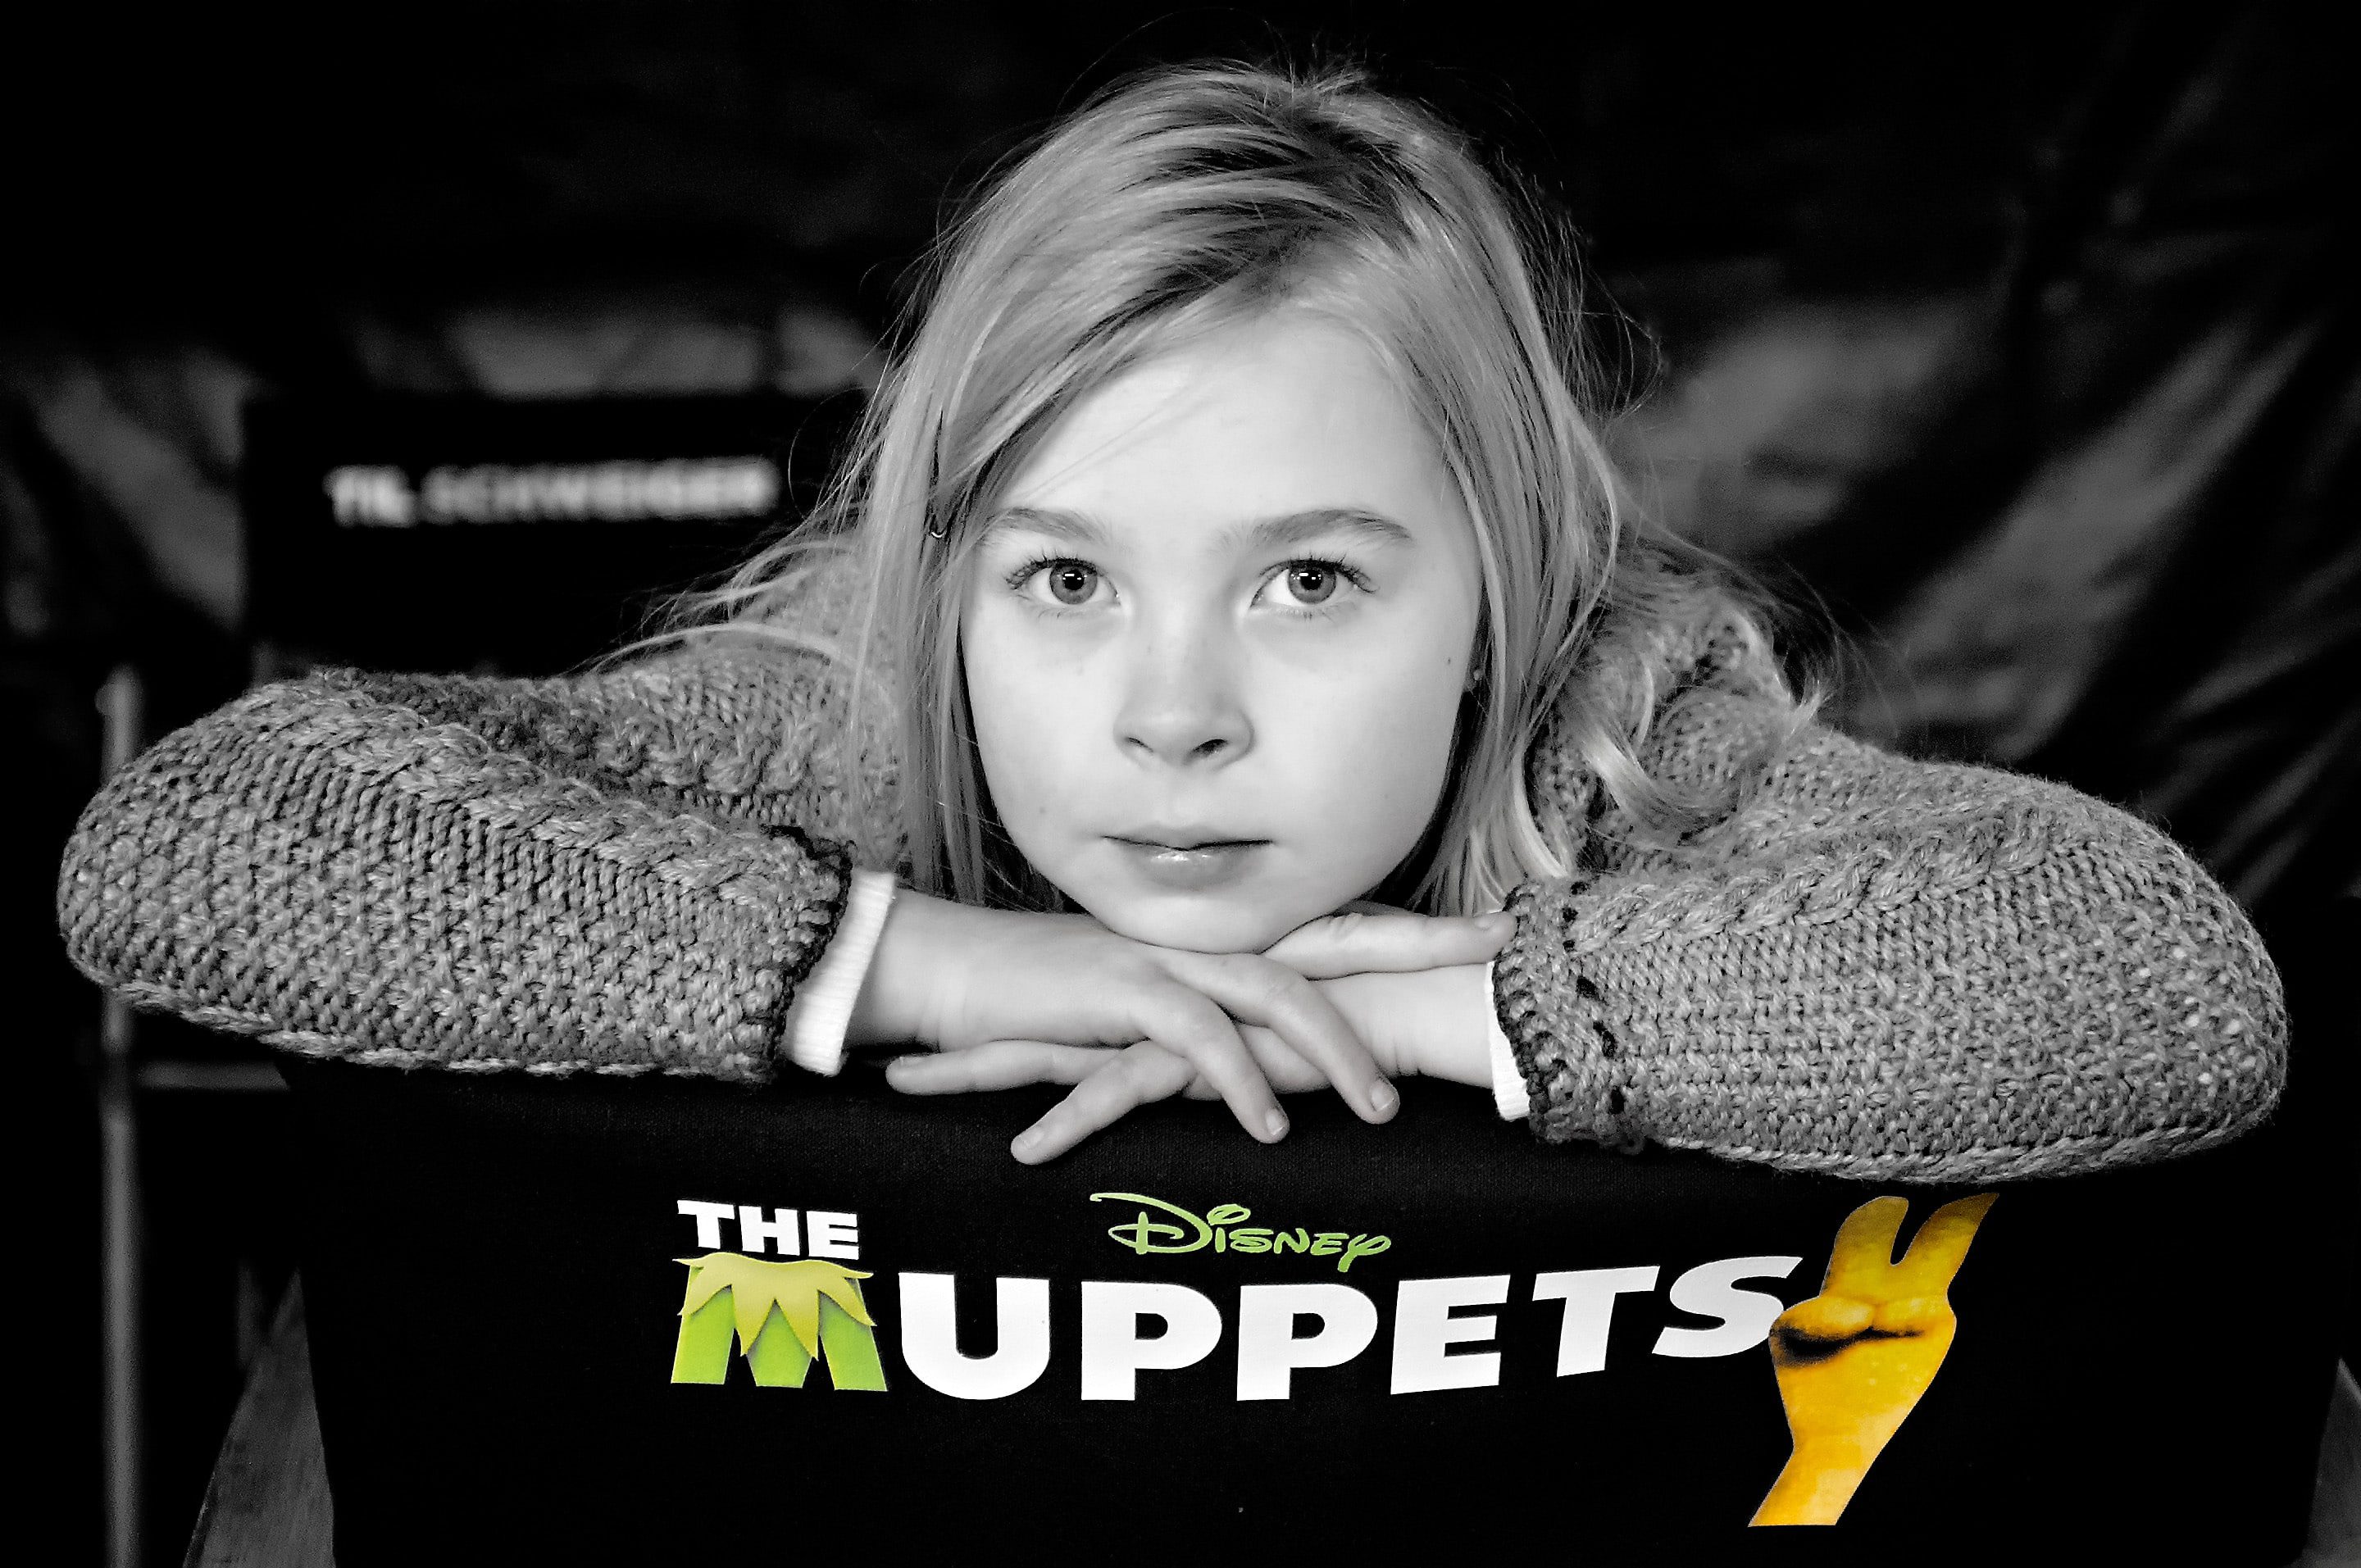 The Muppets 2 - Girl Extra Portrait in Director's Chair